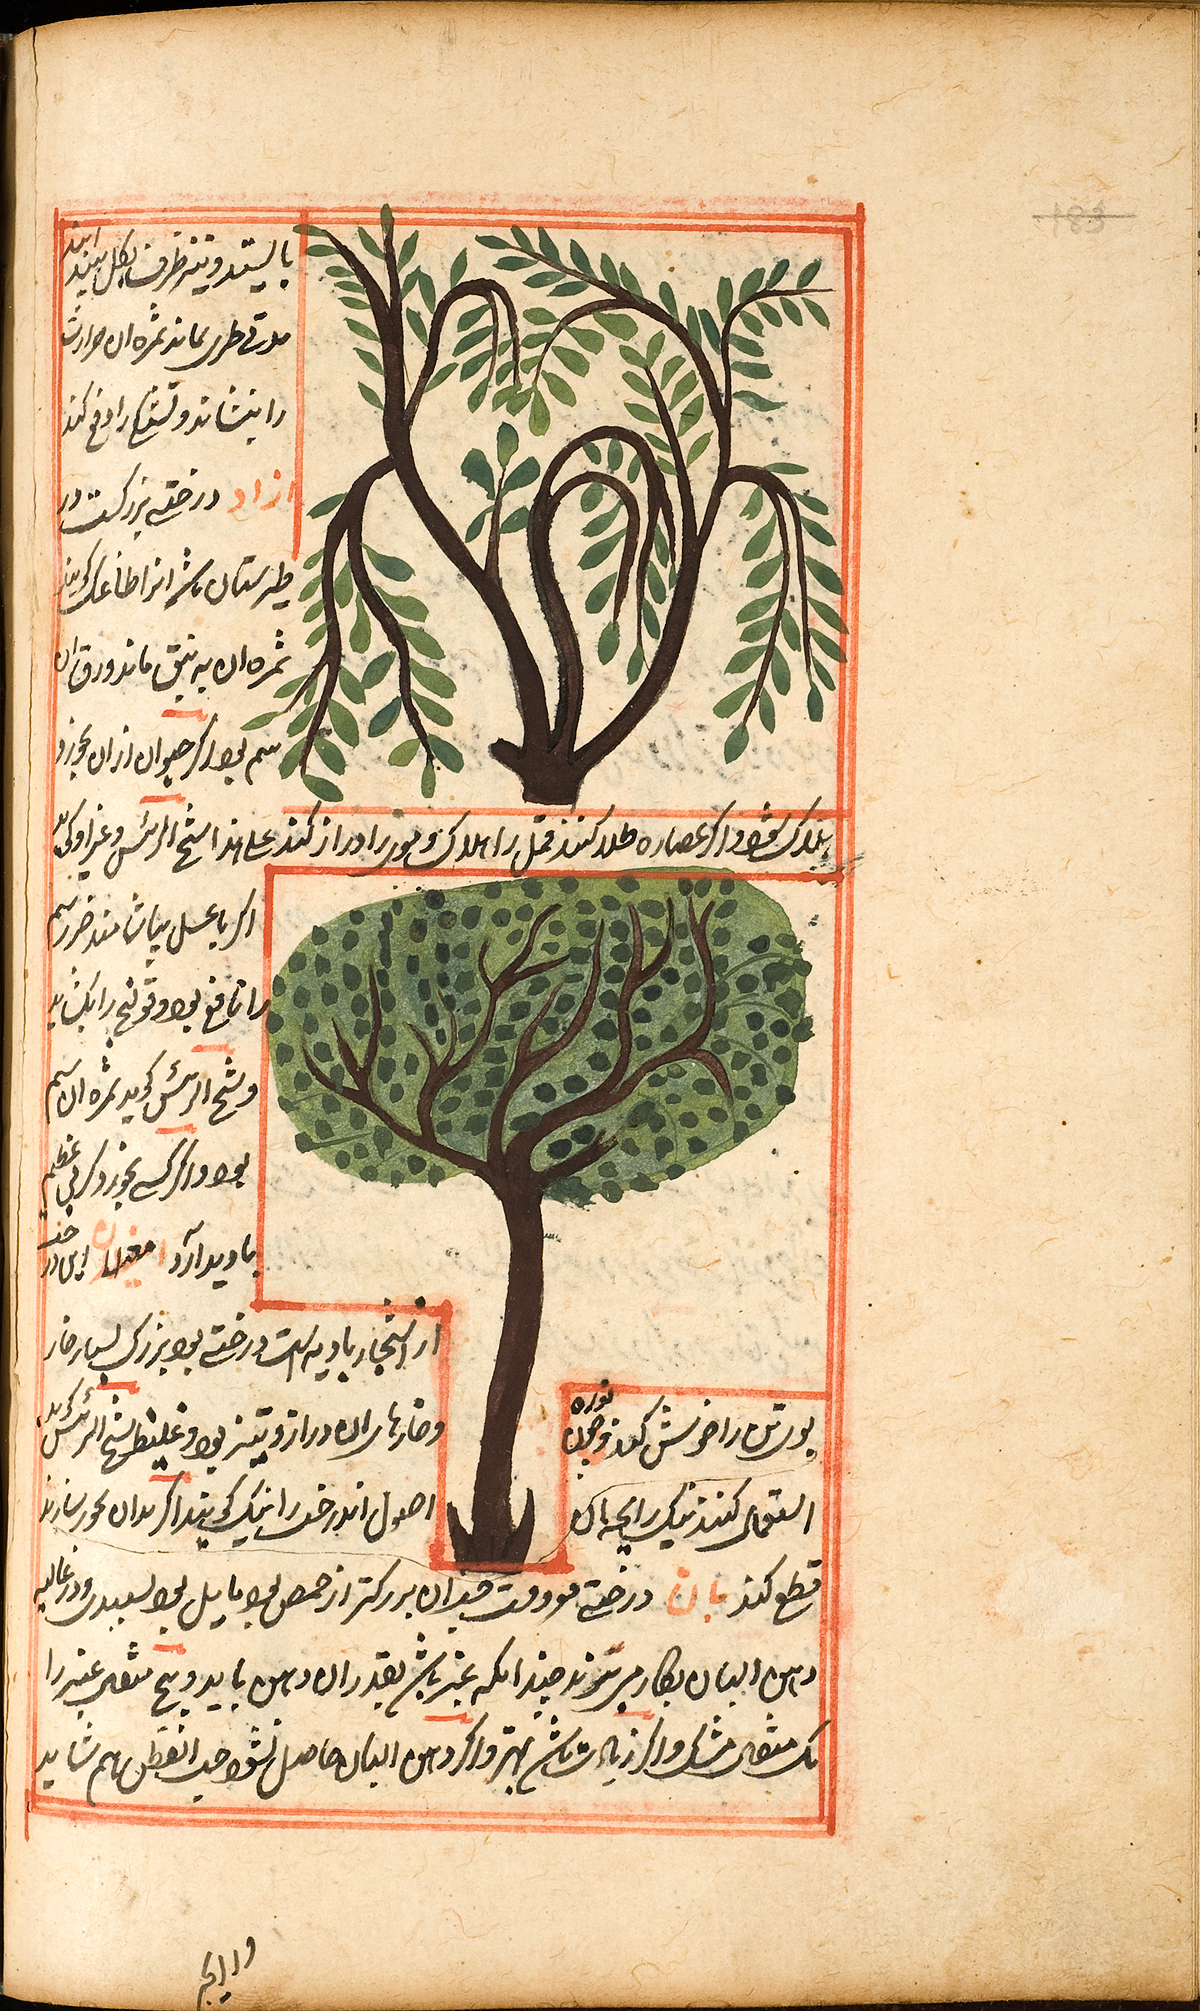 Two trees, the Azah tree and the Amghilan tree, both with green leaves, surrounded by Persian text and a red double ruled border.